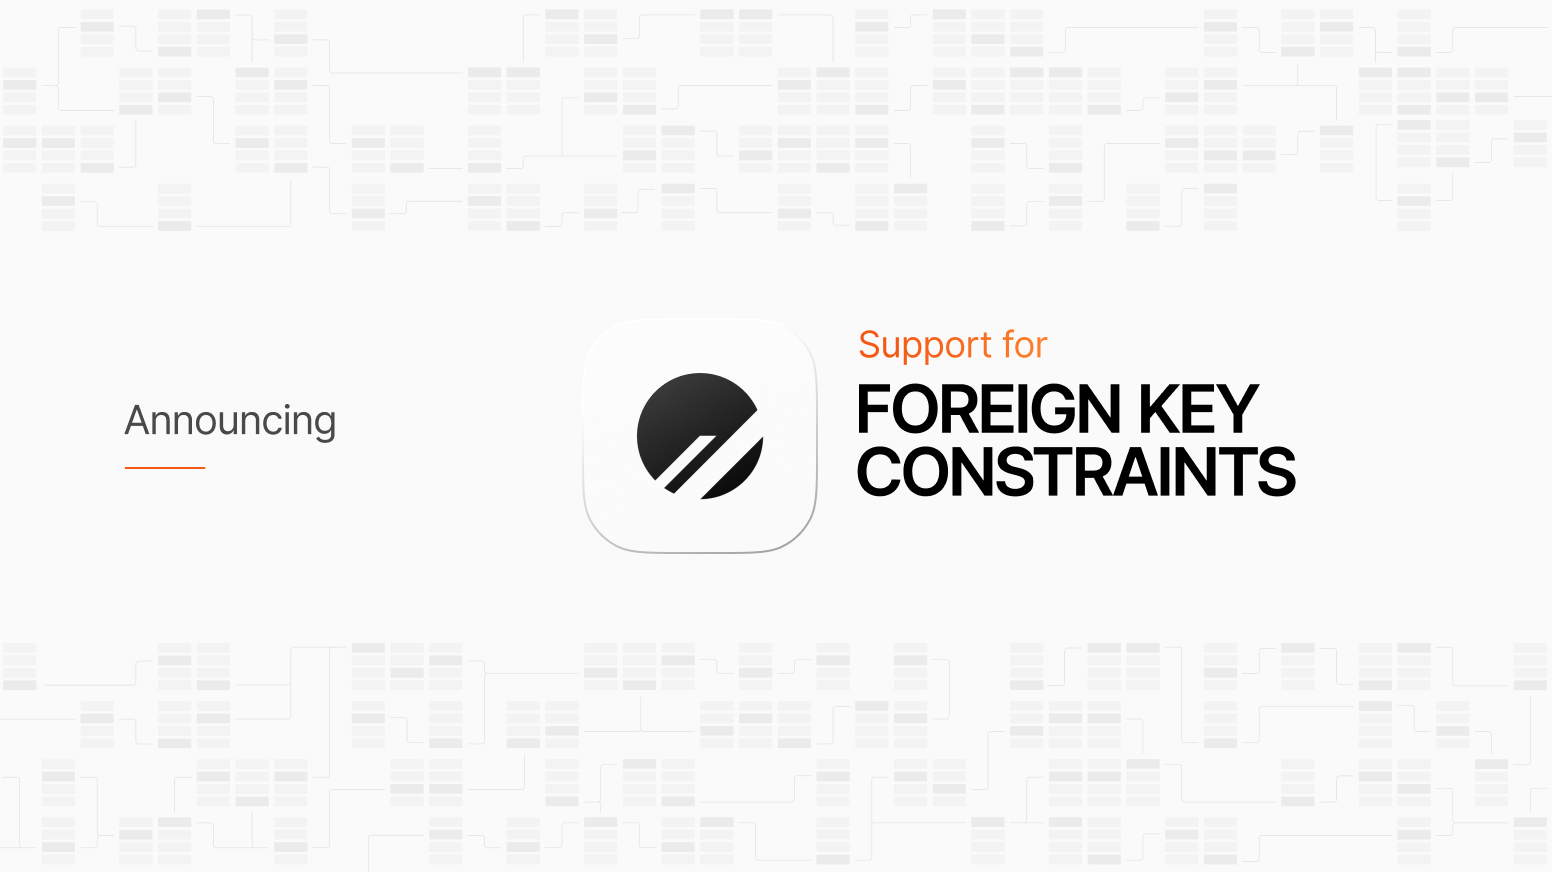 Announcing foreign key constraints support